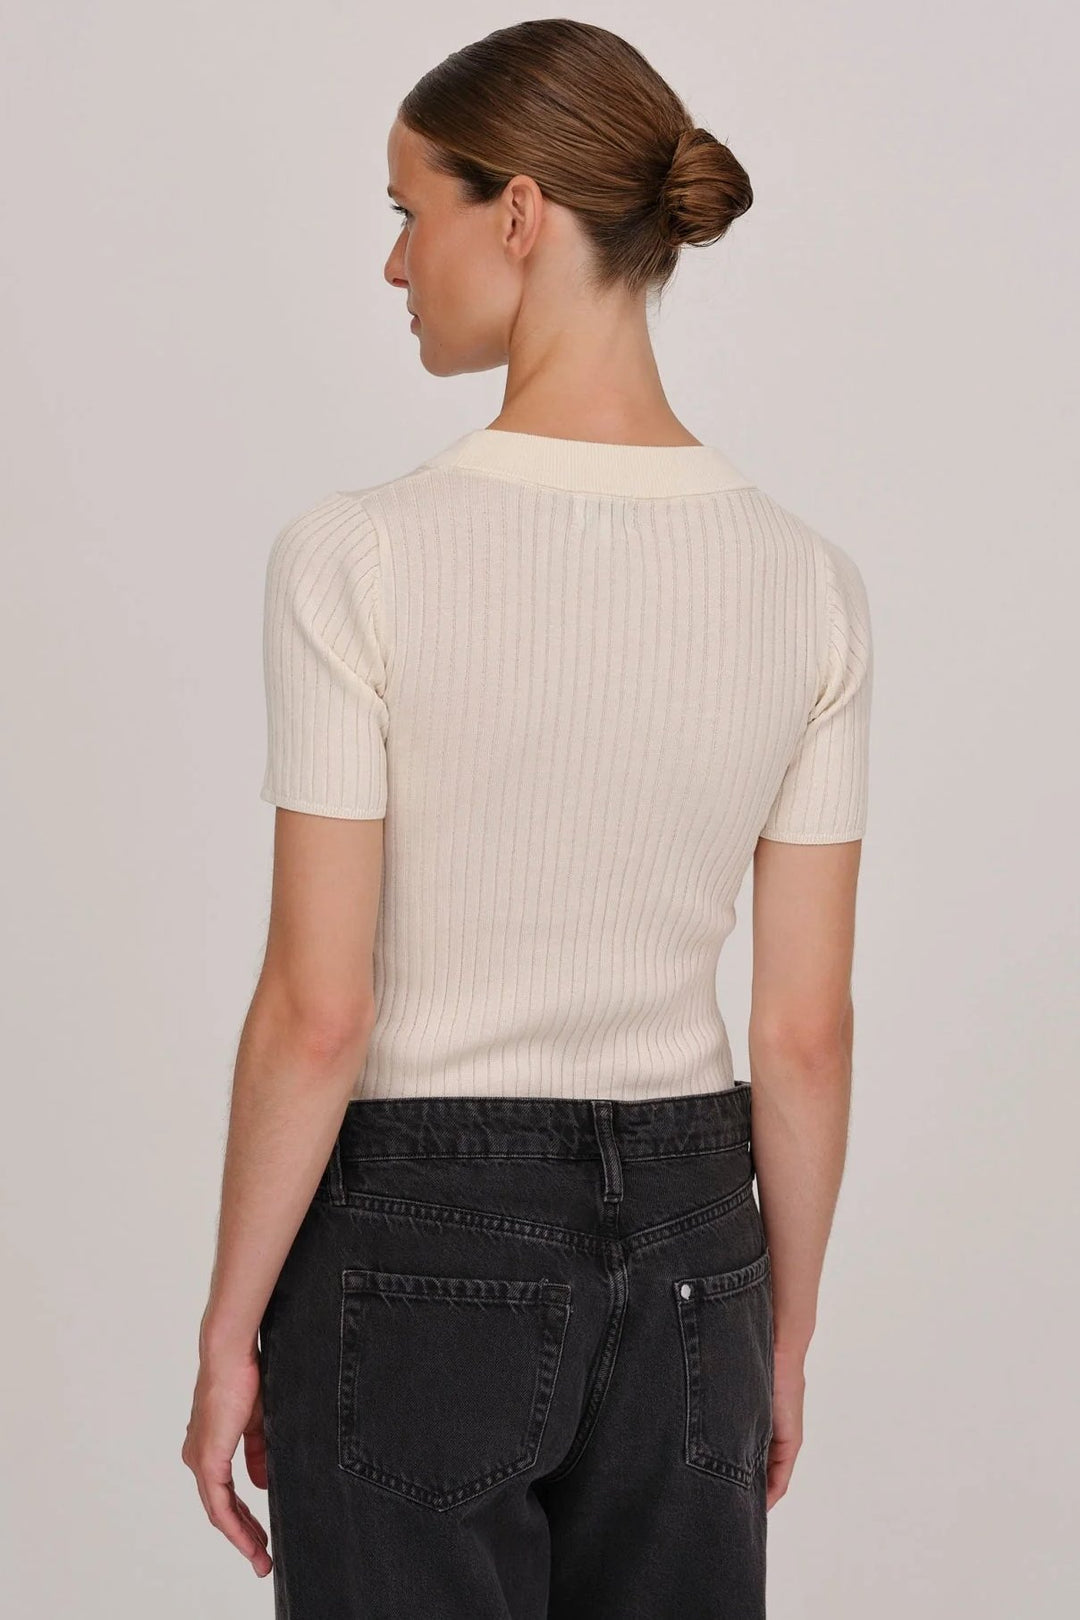 Herskind | Bluse | Doofy Knit Blouse, off-white